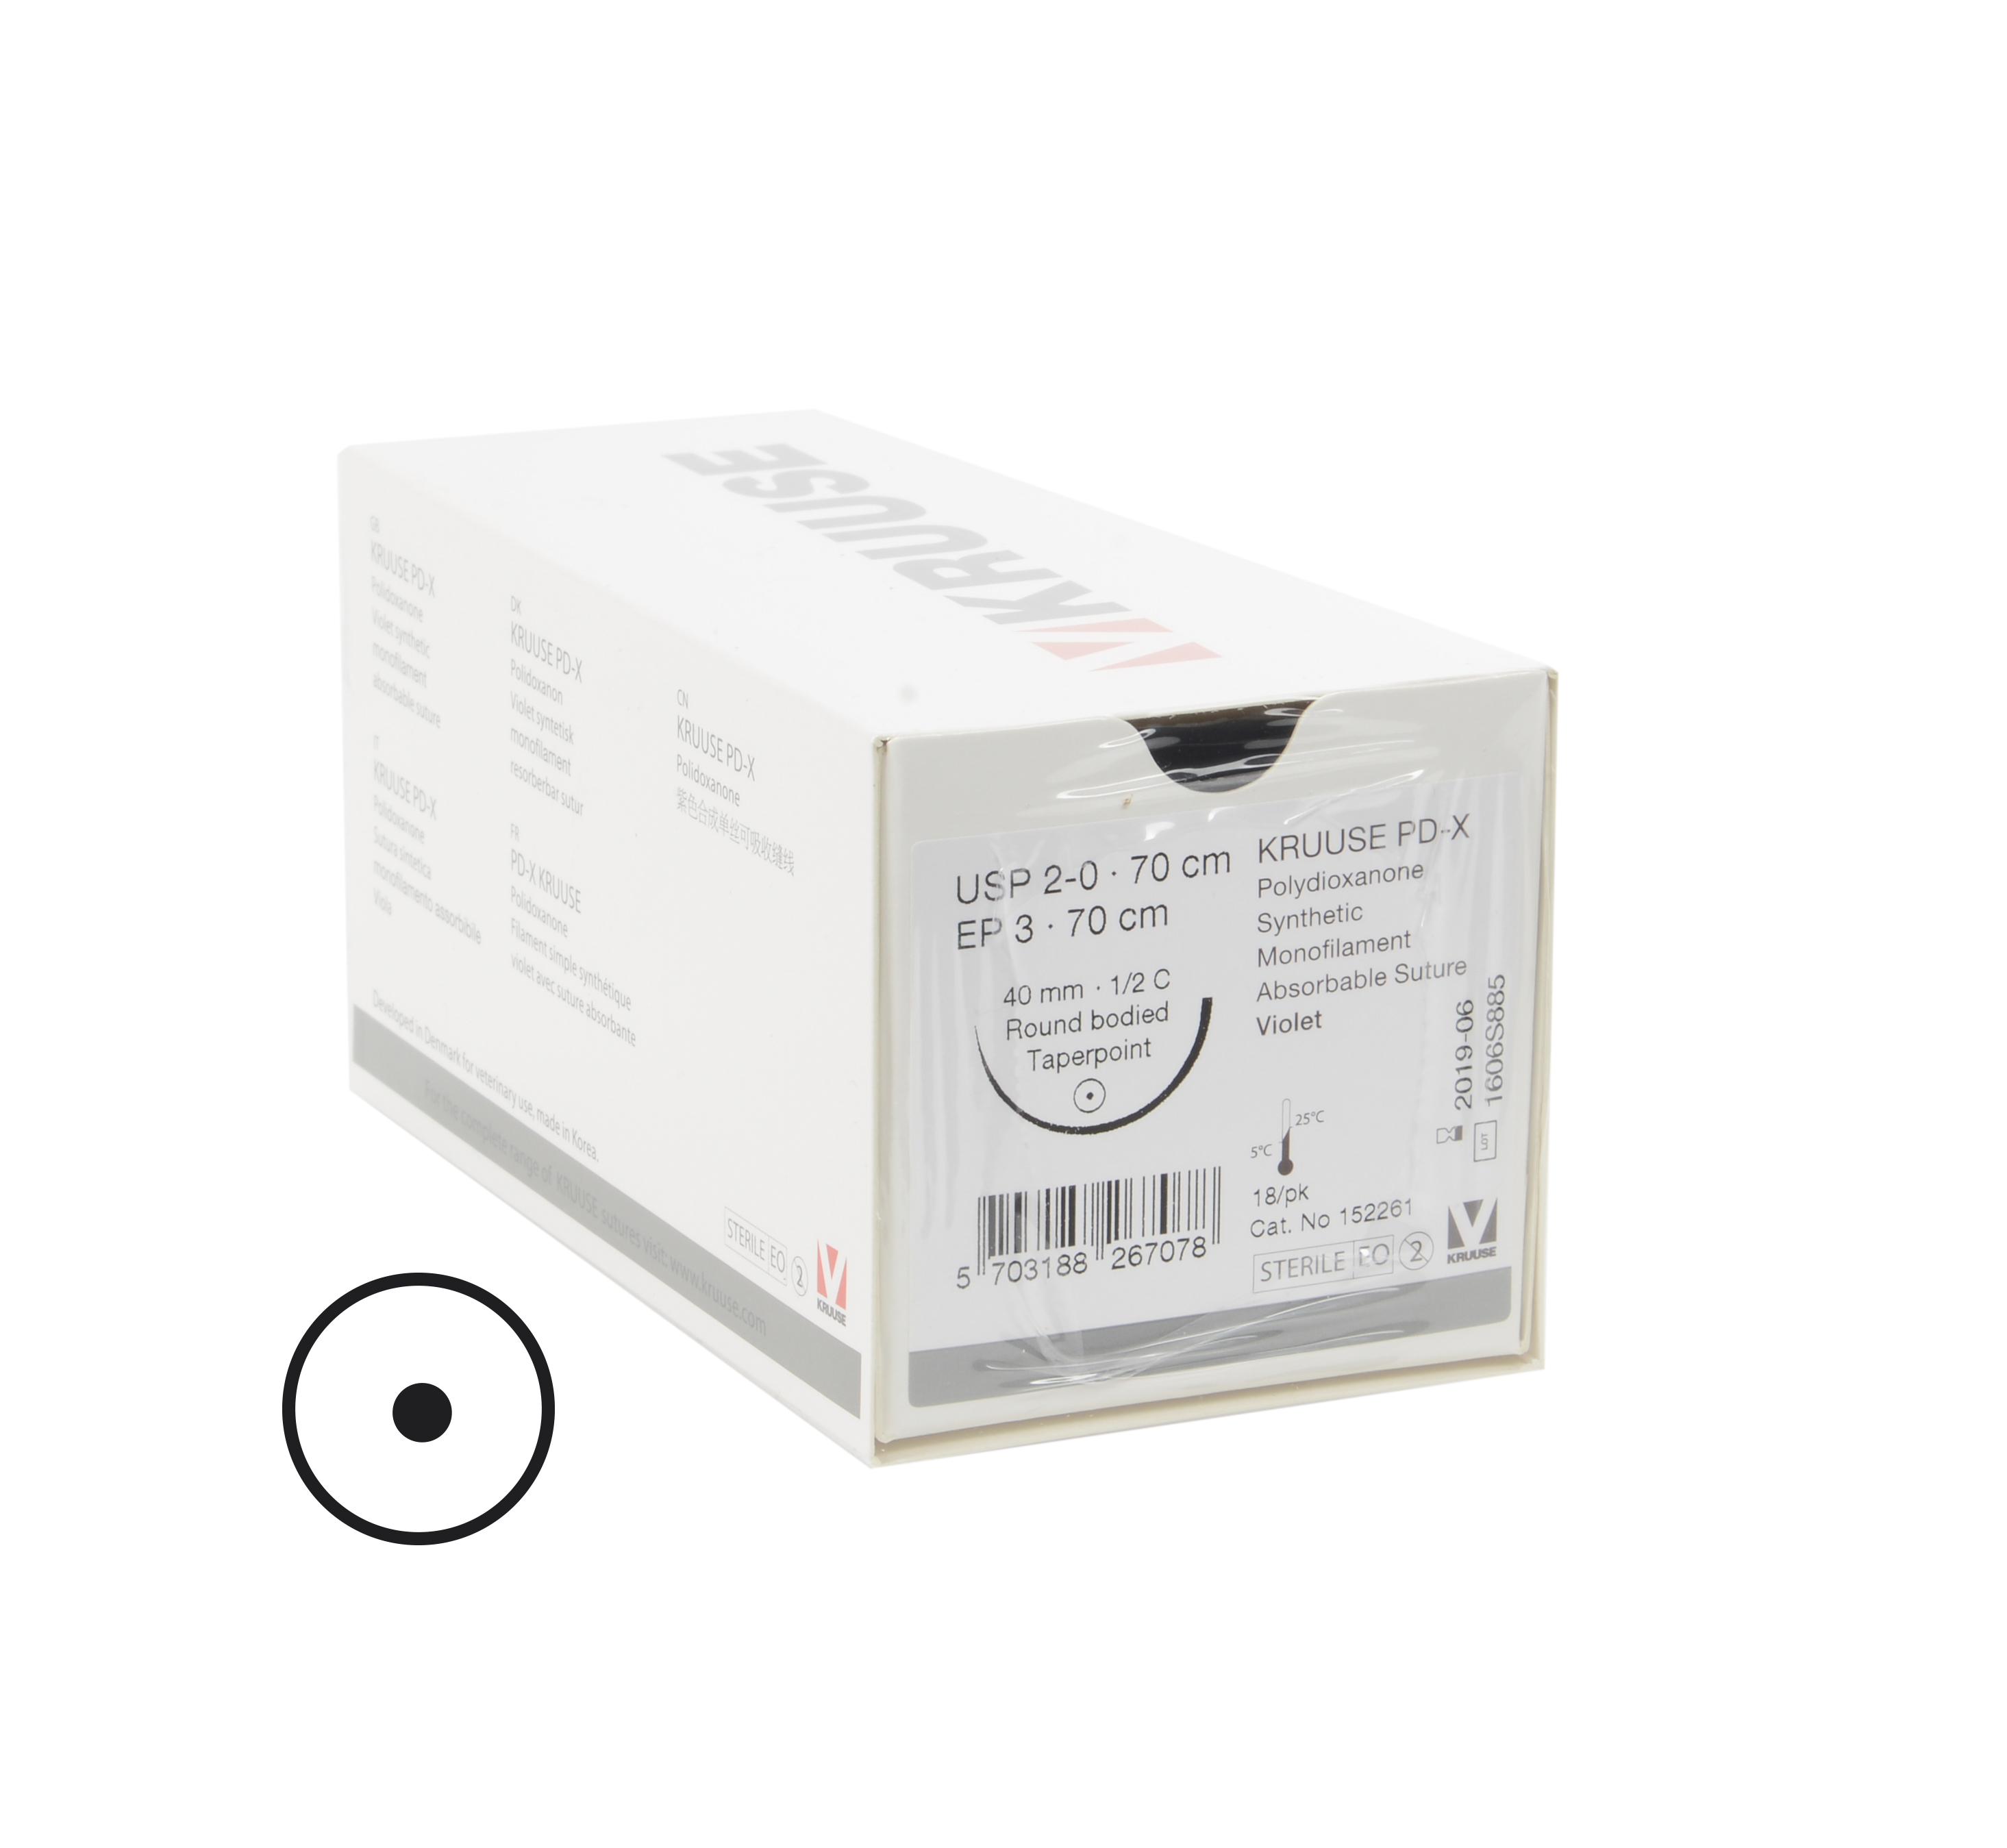 KRUUSE PD-X Suture, USP 2-0/EP 3, 70 cm. needle: 40 mm, ½ C, Round Bodied, taper point, 18/pk